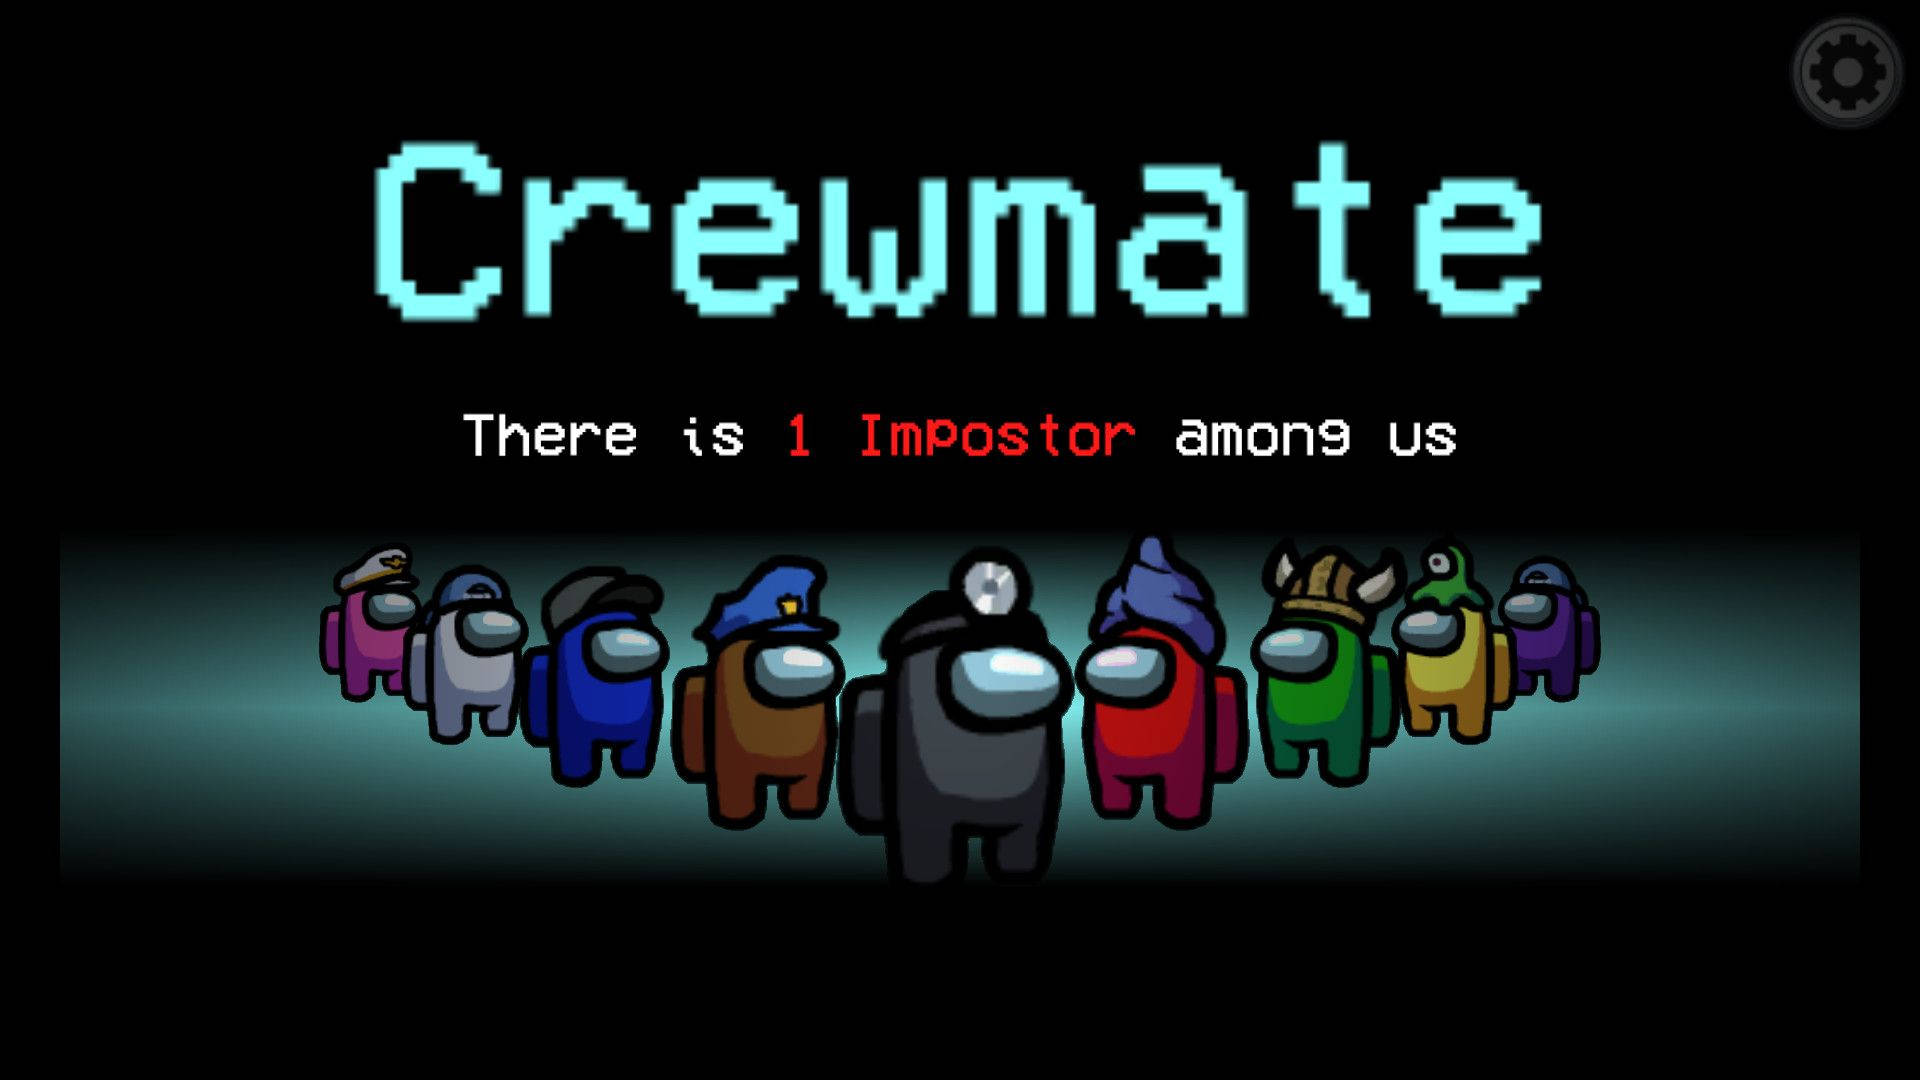 Crewmate Role Among Us Imposter Background